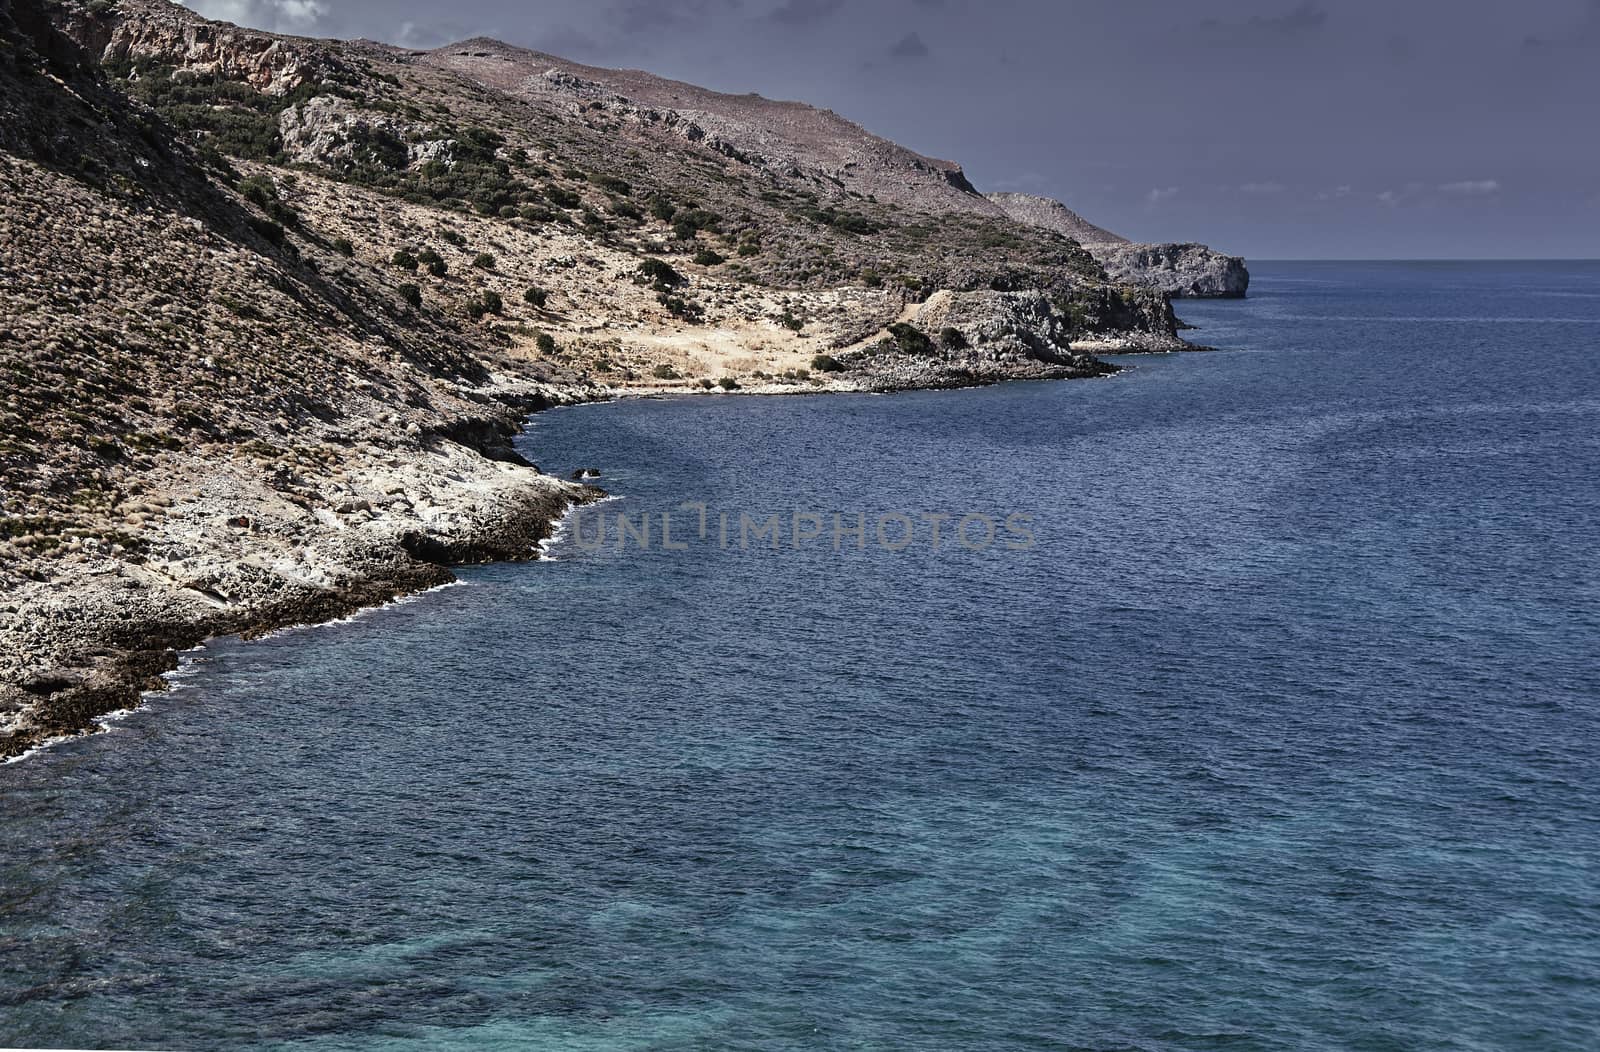 View of the coast on the island of Crete, Greece